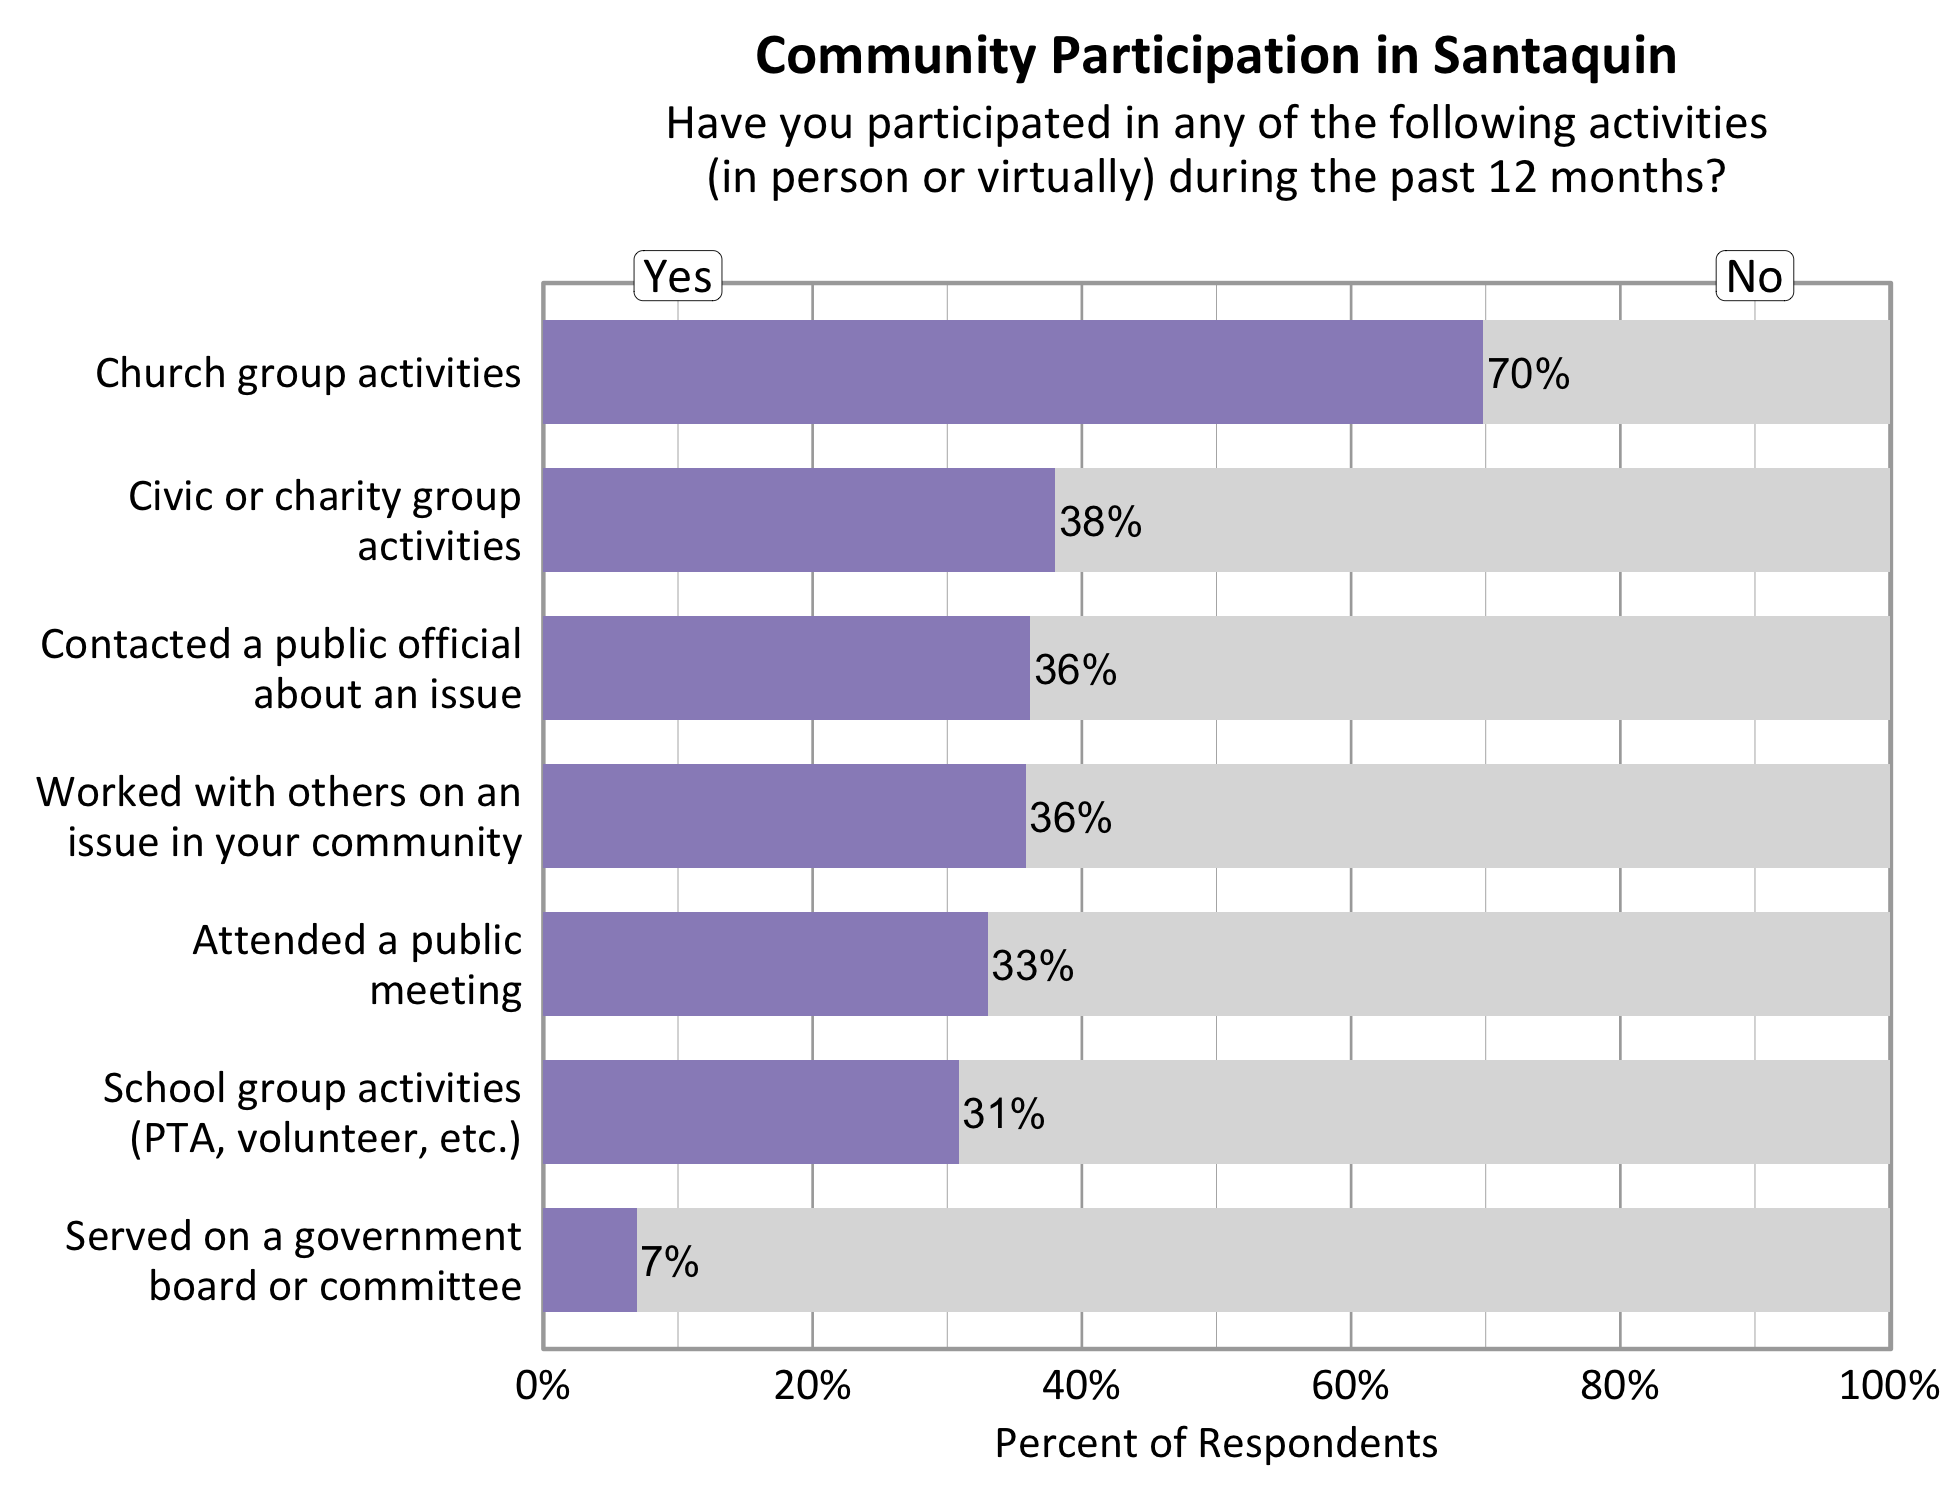 Type: Bar Graph Title: Community Participation in Santaquin. Subtitle: Have you participated in any of the following activities (in person or virtually) during the past 12 months? Data - 70% of respondents indicated yes to church group activities. 36% of respondents indicated yes to working with others on an issue in your community. 36% of respondents indicated yes to contacting a public official about an issue. 38% of respondents indicated yes to a civic or charity group activity. 31% of respondents indicated yes to participating in School group activities. 33% of respondents indicated yes to attending a public meeting. 7% of respondents indicated yes to serving on a government board or committee. 